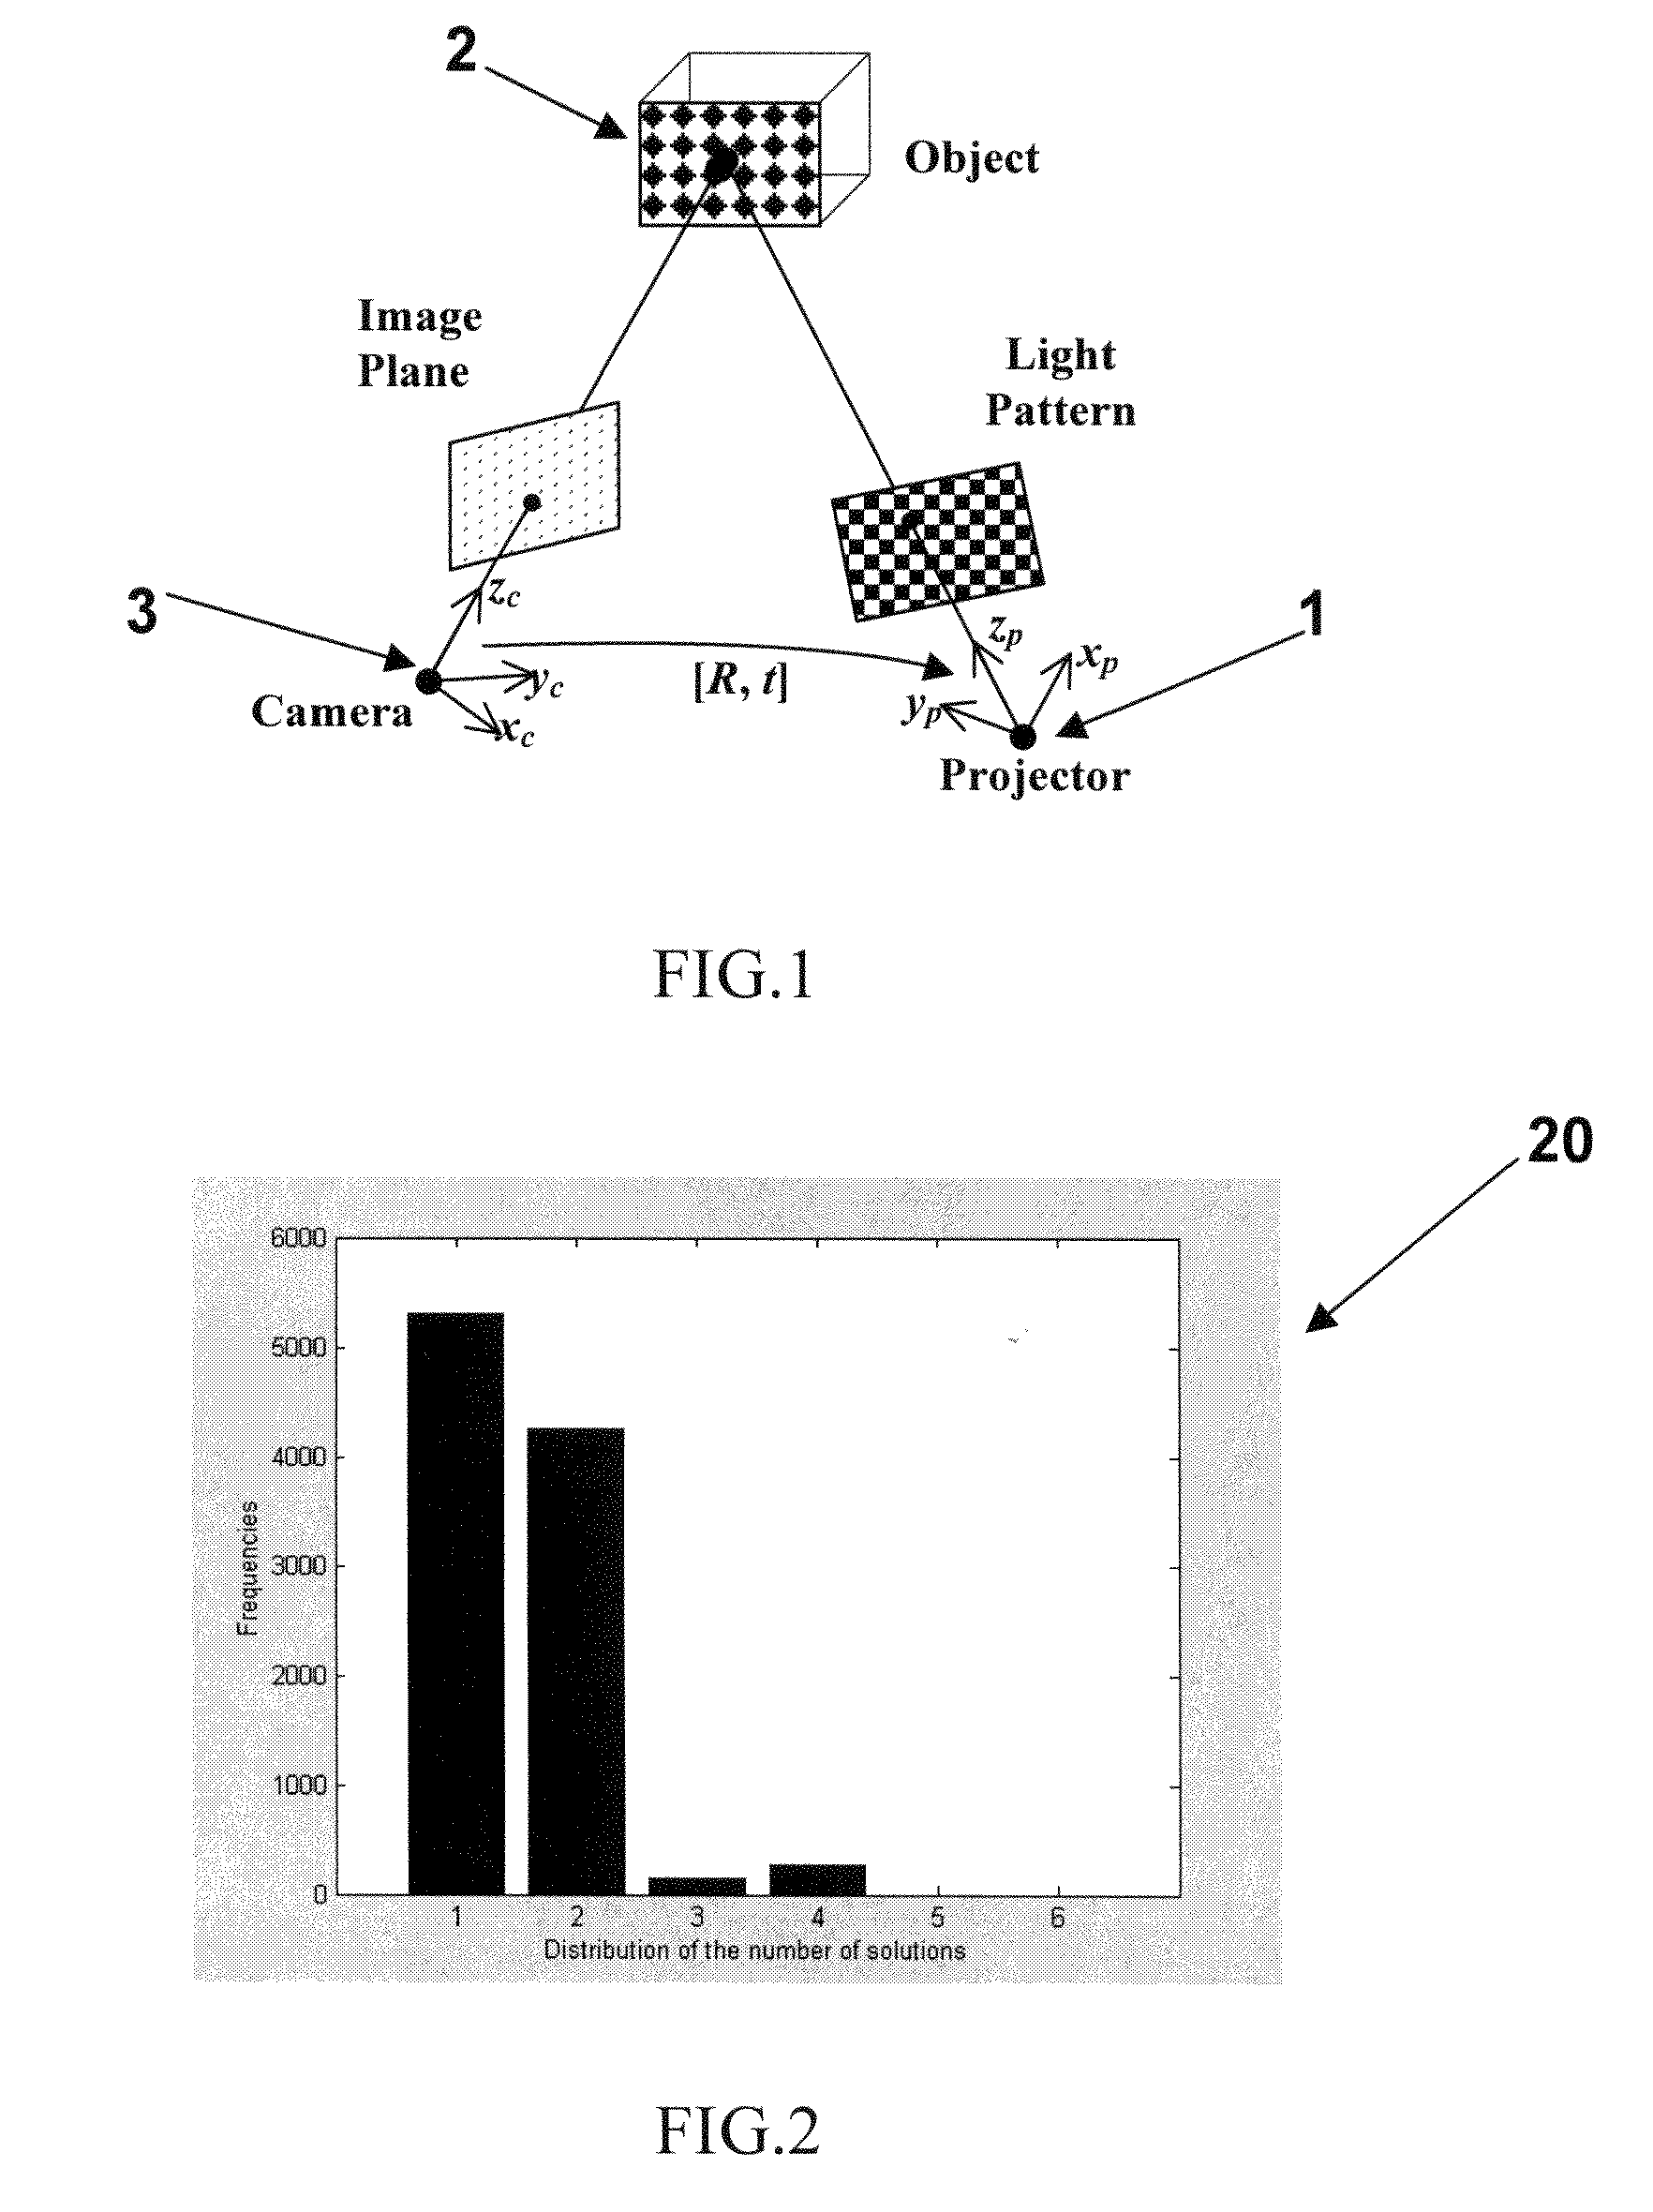 Auto-calibration method for a projector-camera system